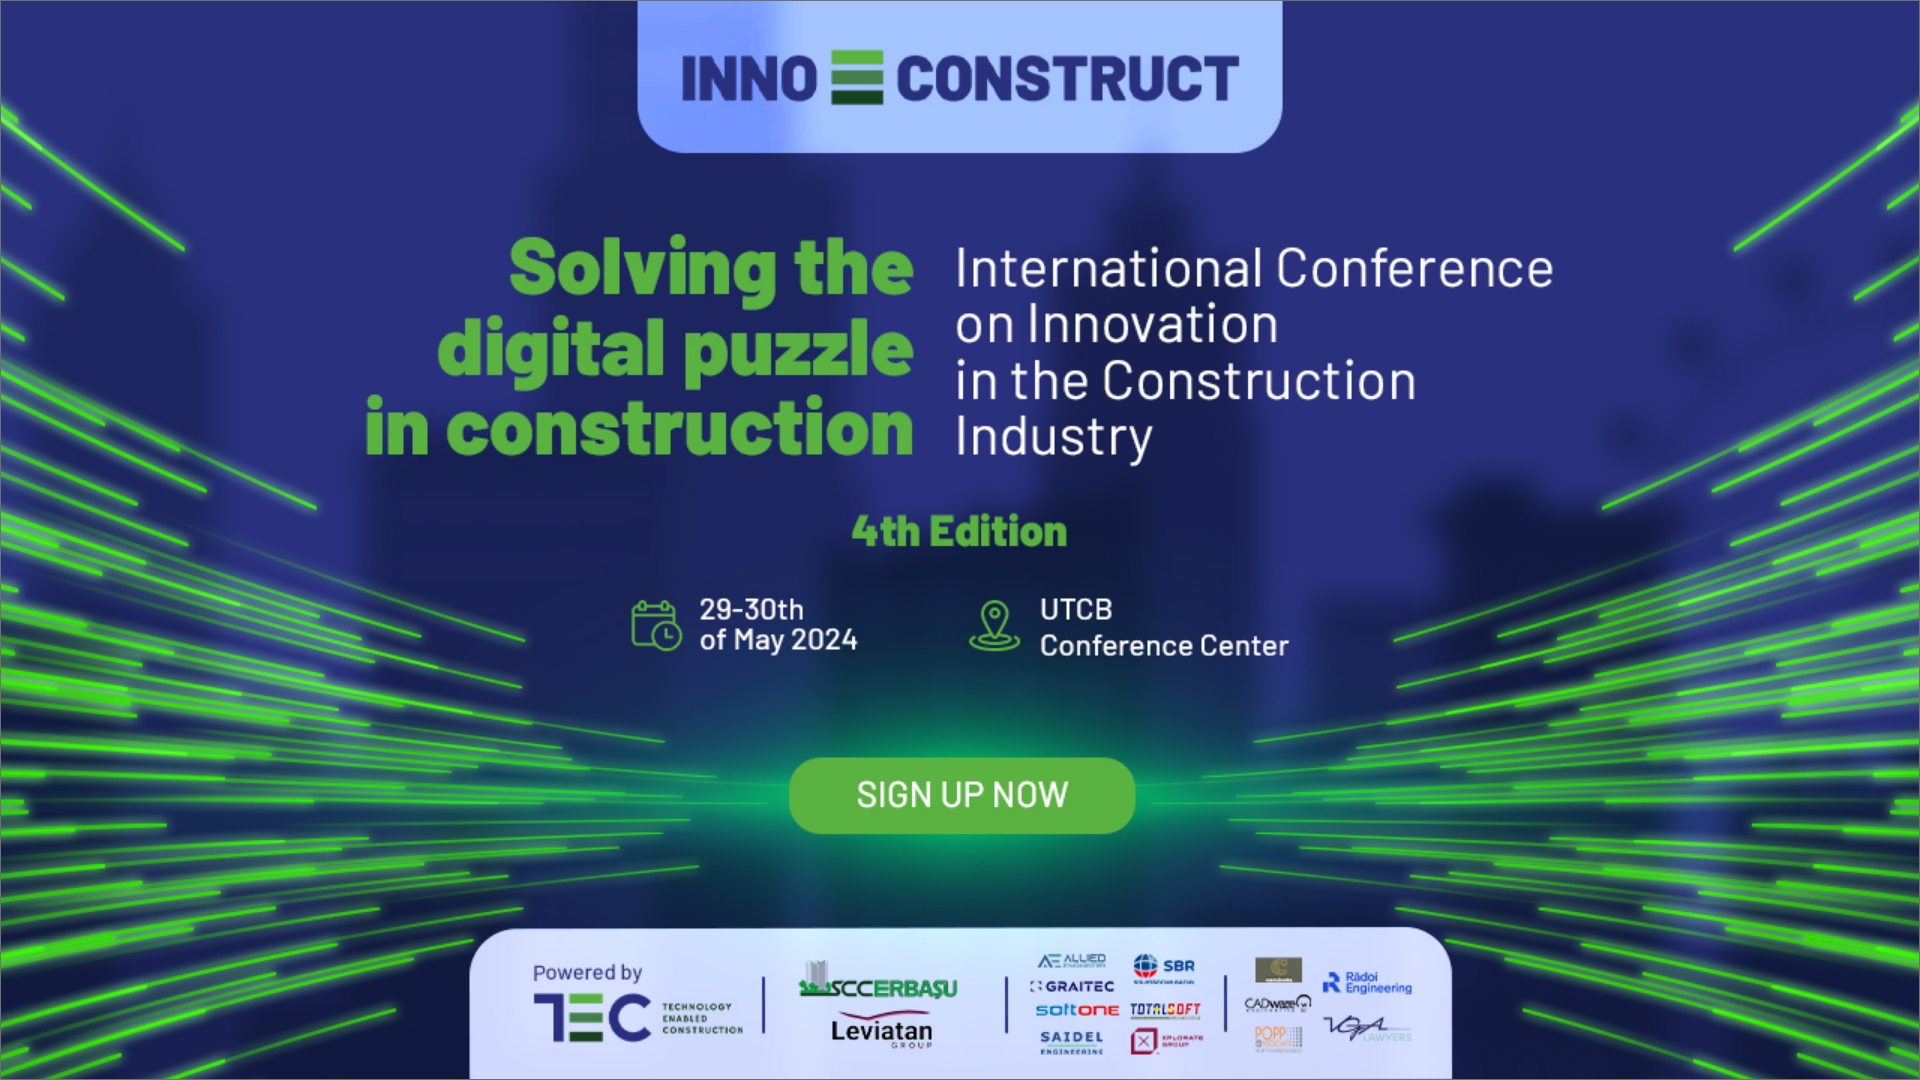 INNOCONSTRUCT 2024 - 4th edition - Solving the digital puzzle in construction